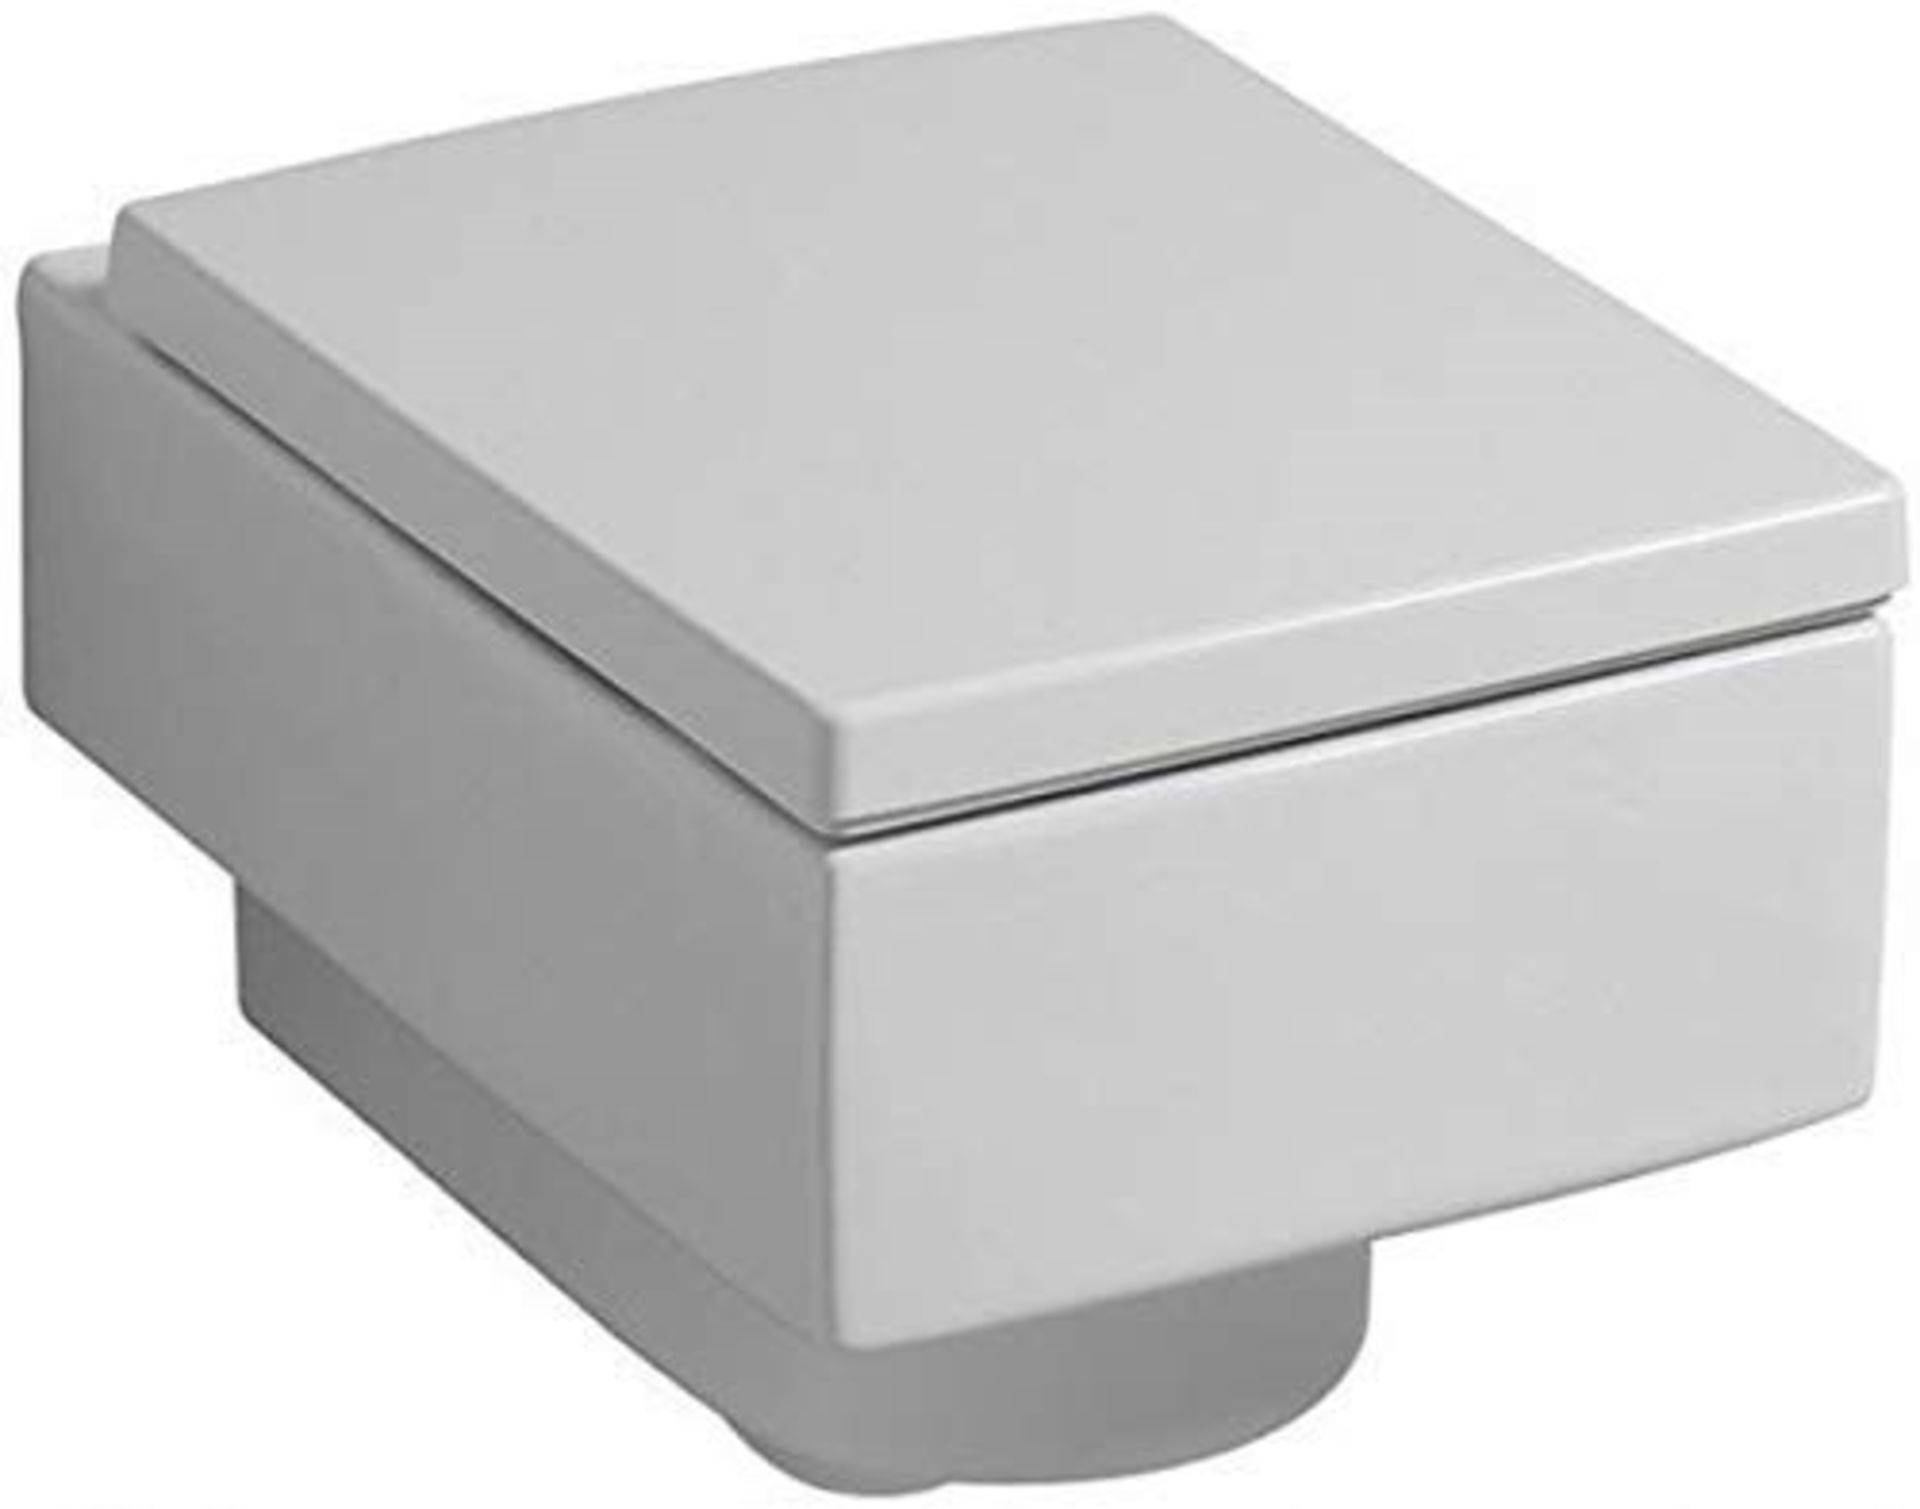 (PC59) Keramag Preciosa - Wash-down Wall Hung Toilet. wall hung Fits effortlessly into even th...( - Image 2 of 4